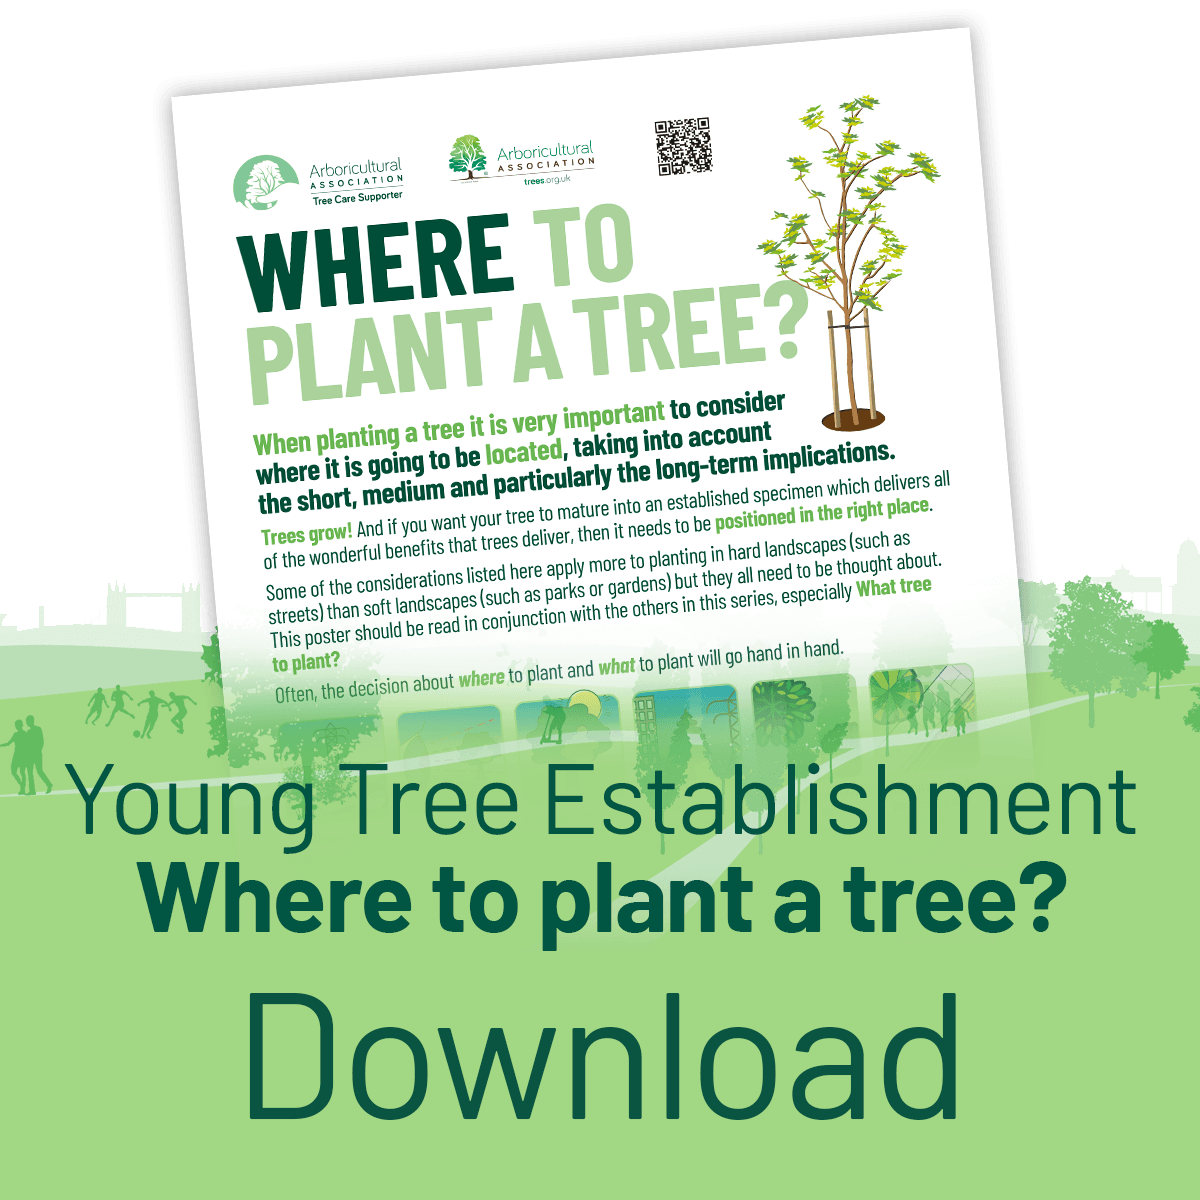 Download the Young Tree Establishment Where to Plant a Tree? Poster